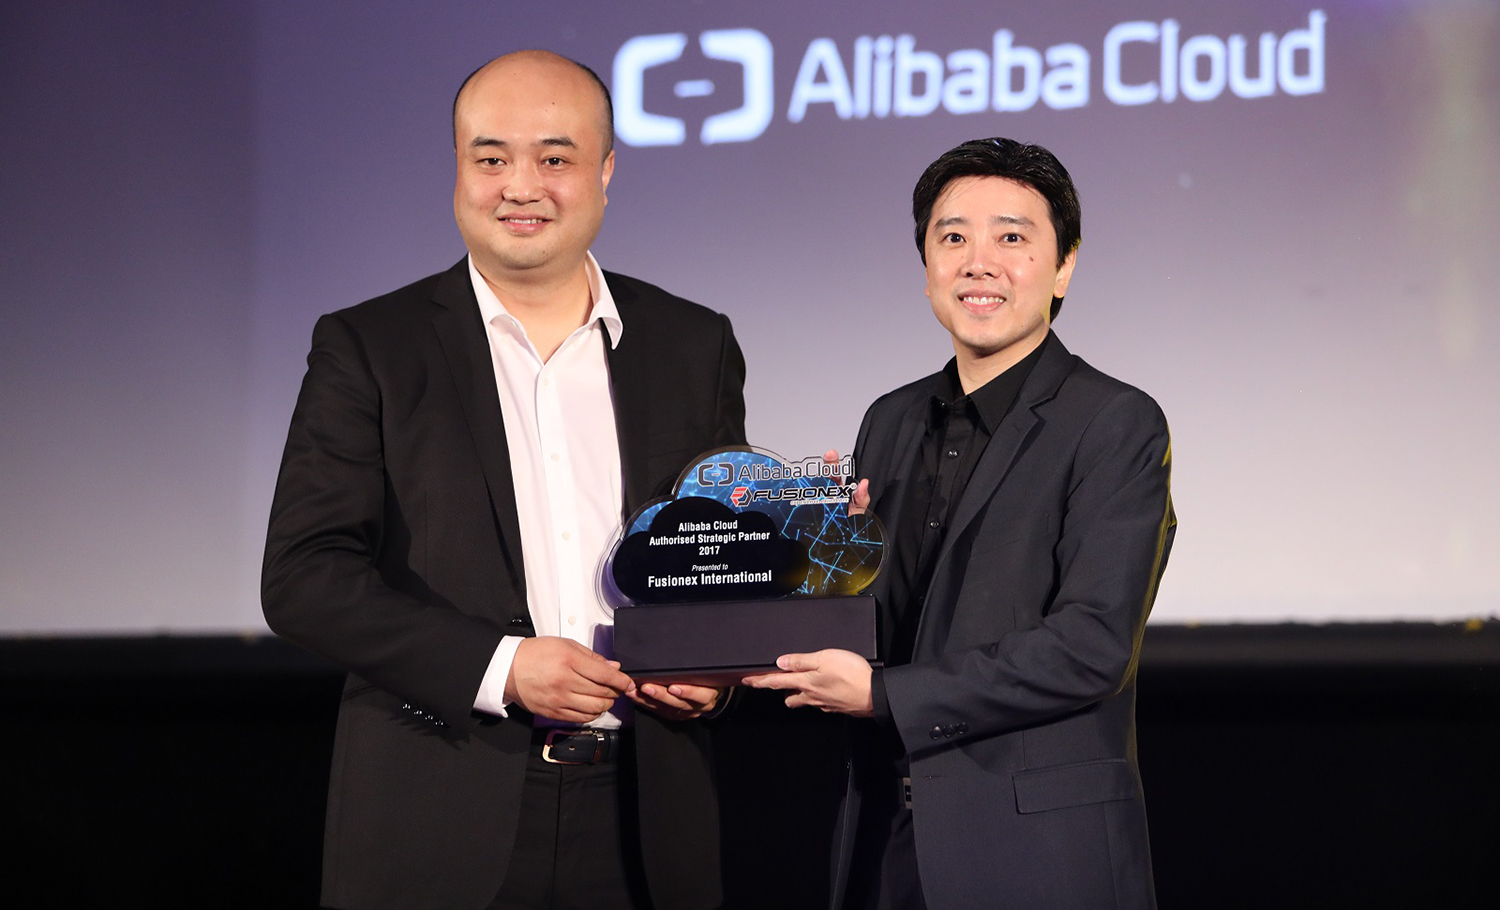 Alibaba Cloud trains its sights on Southeast Asia